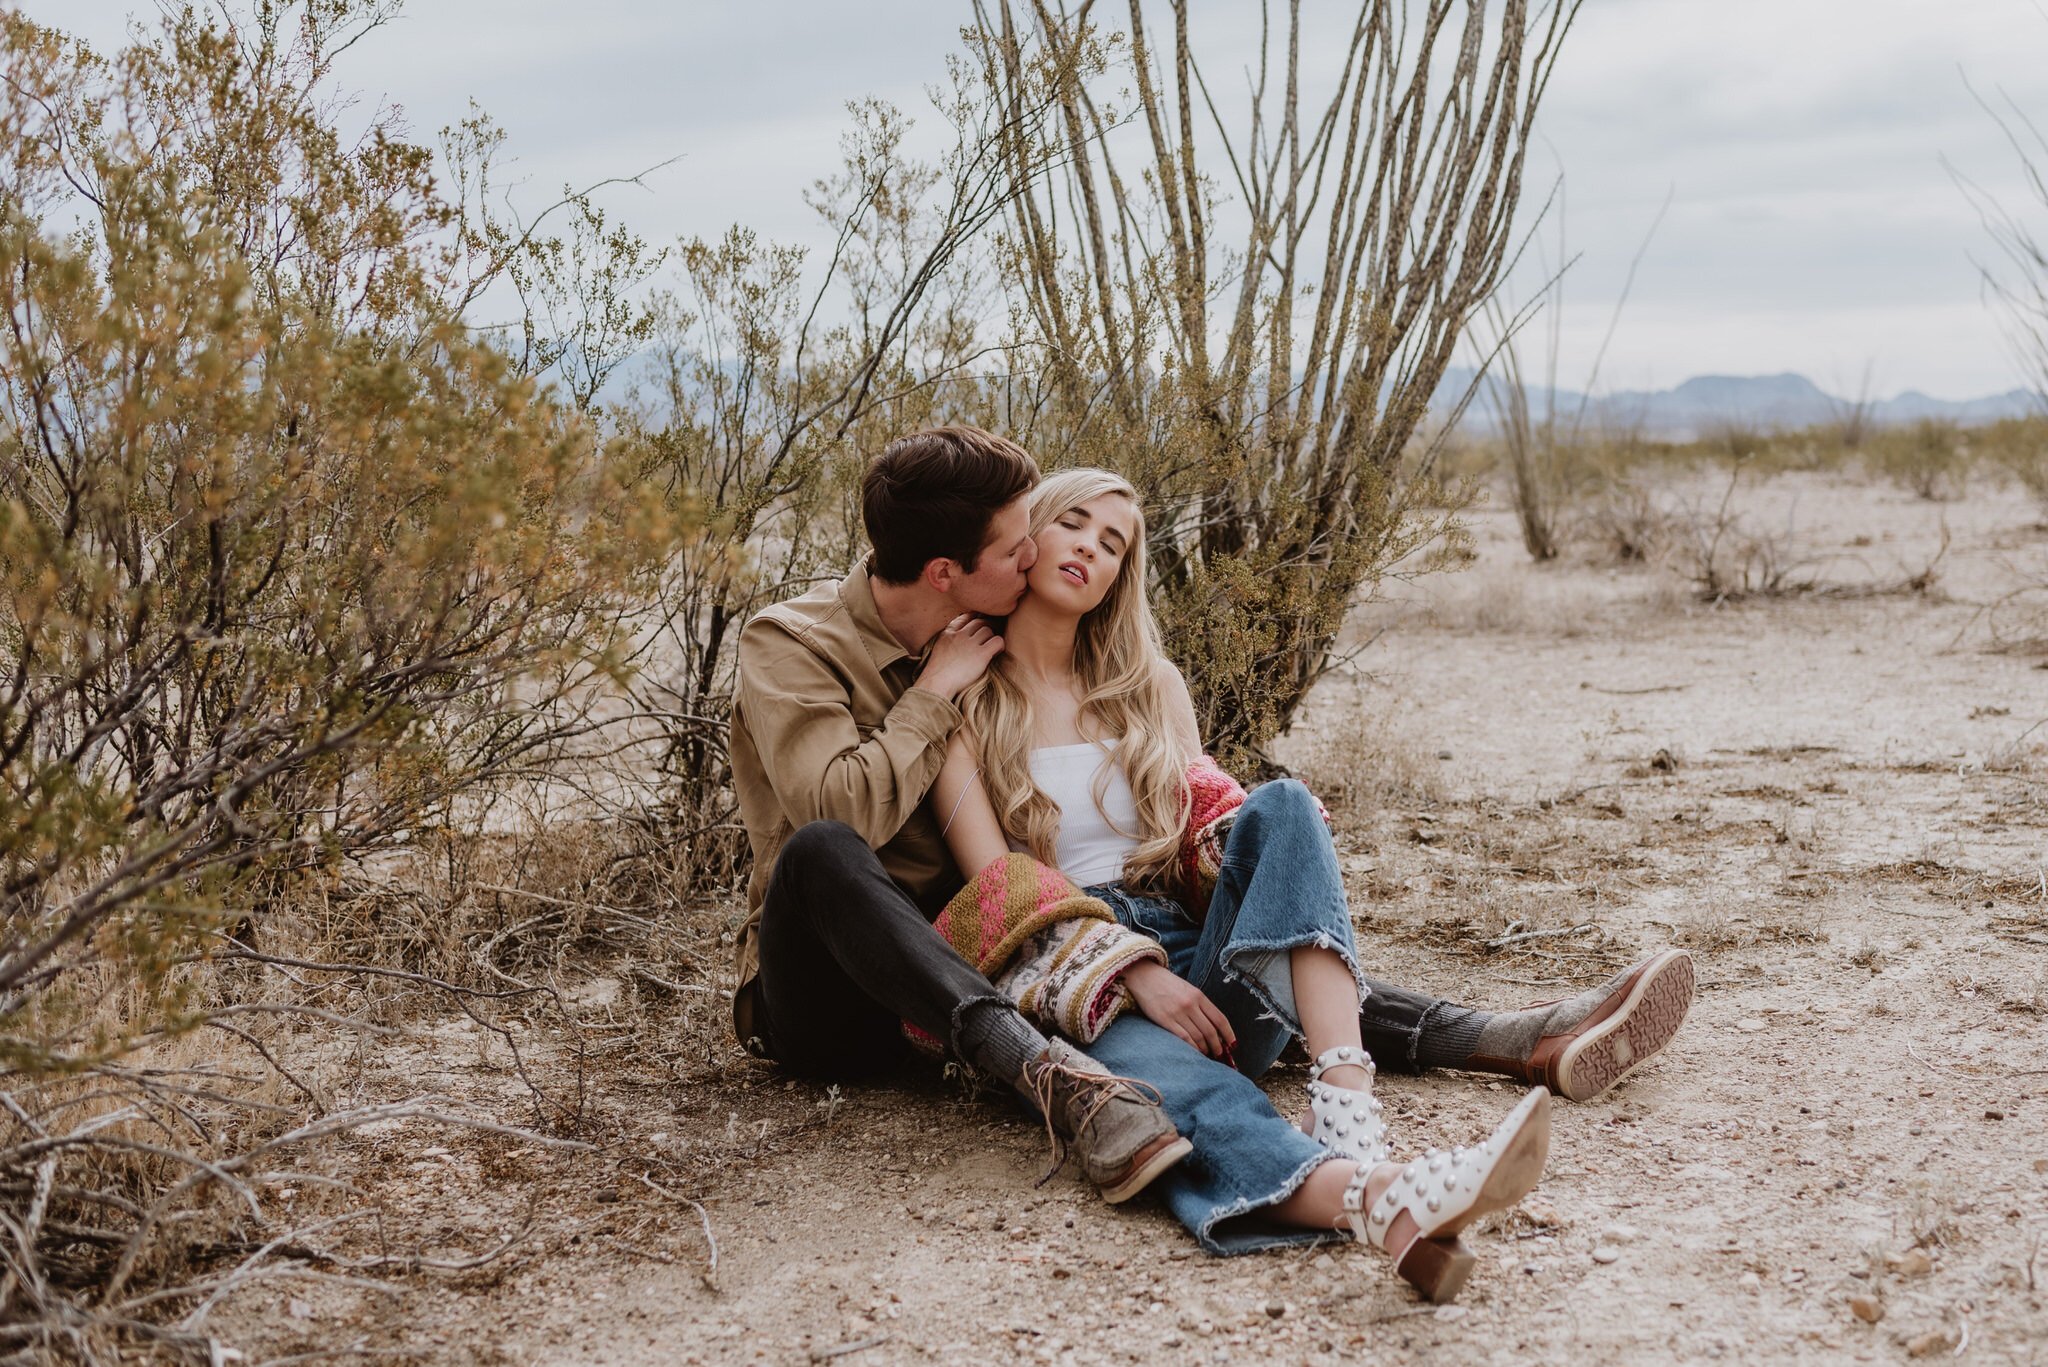 Kaylie-Sirek-Photography-Big-Bend-National-Park-Texas-Engagement-Session-Styled-You-012.jpg